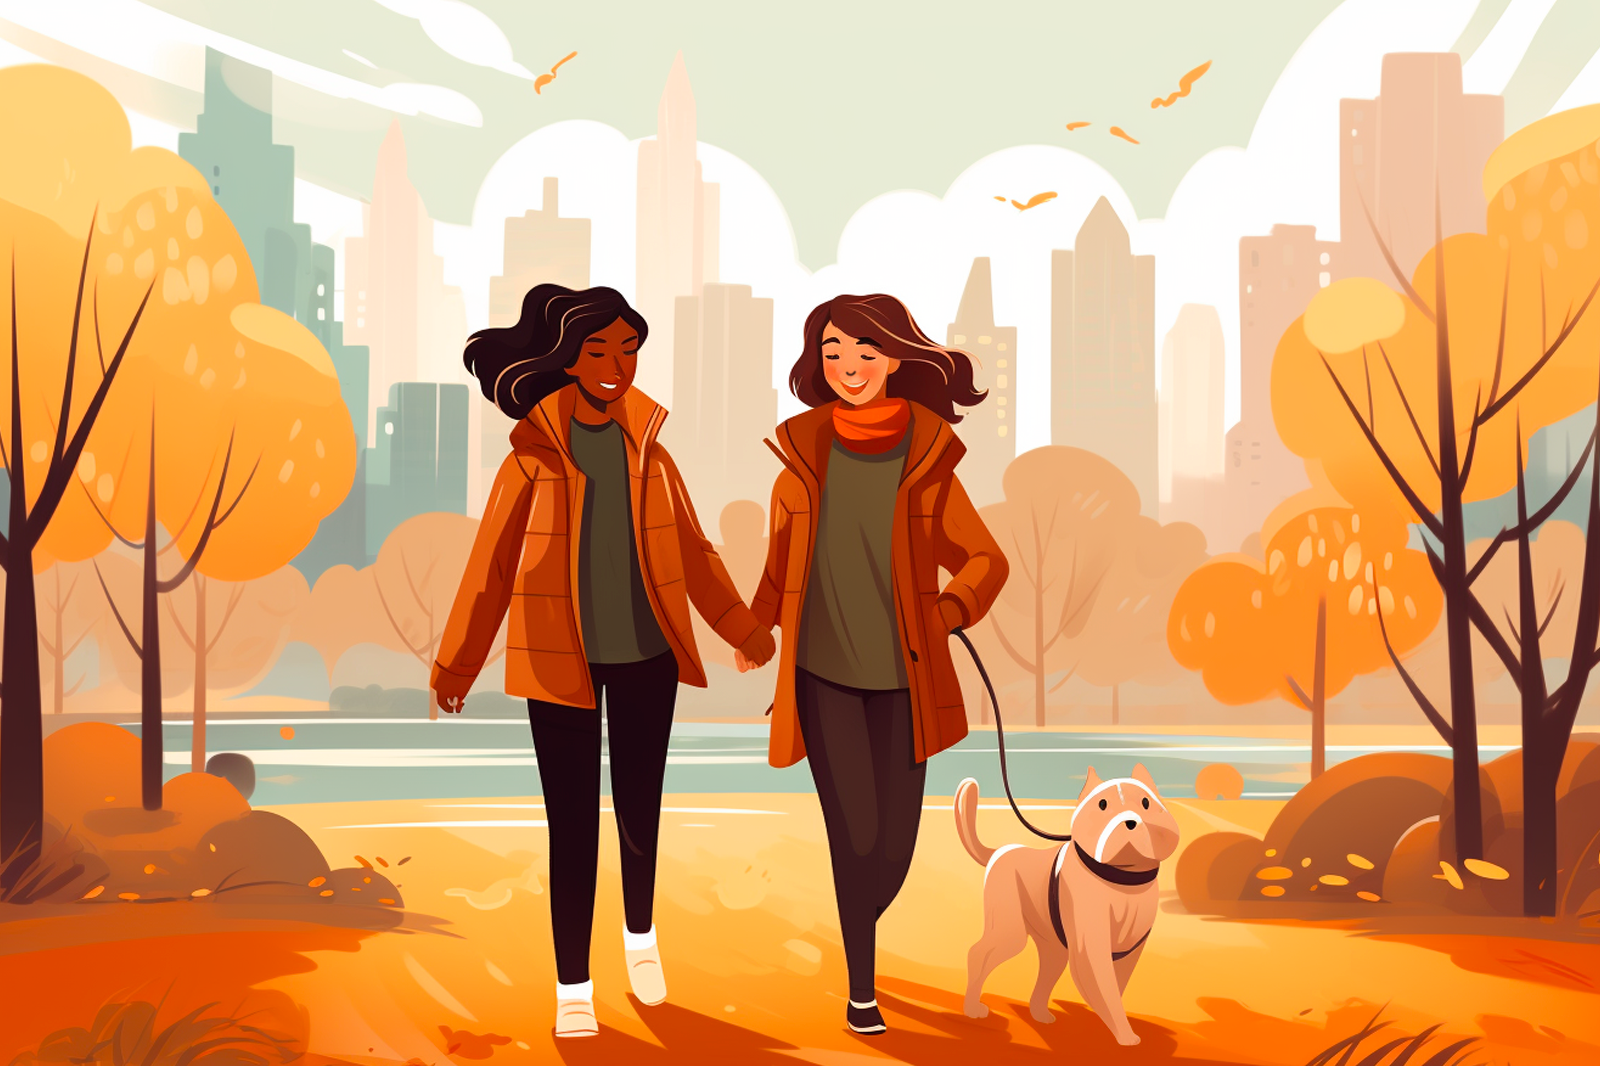 Two joyful women walk their pet dog along the road, surrounded by buildings and a river.